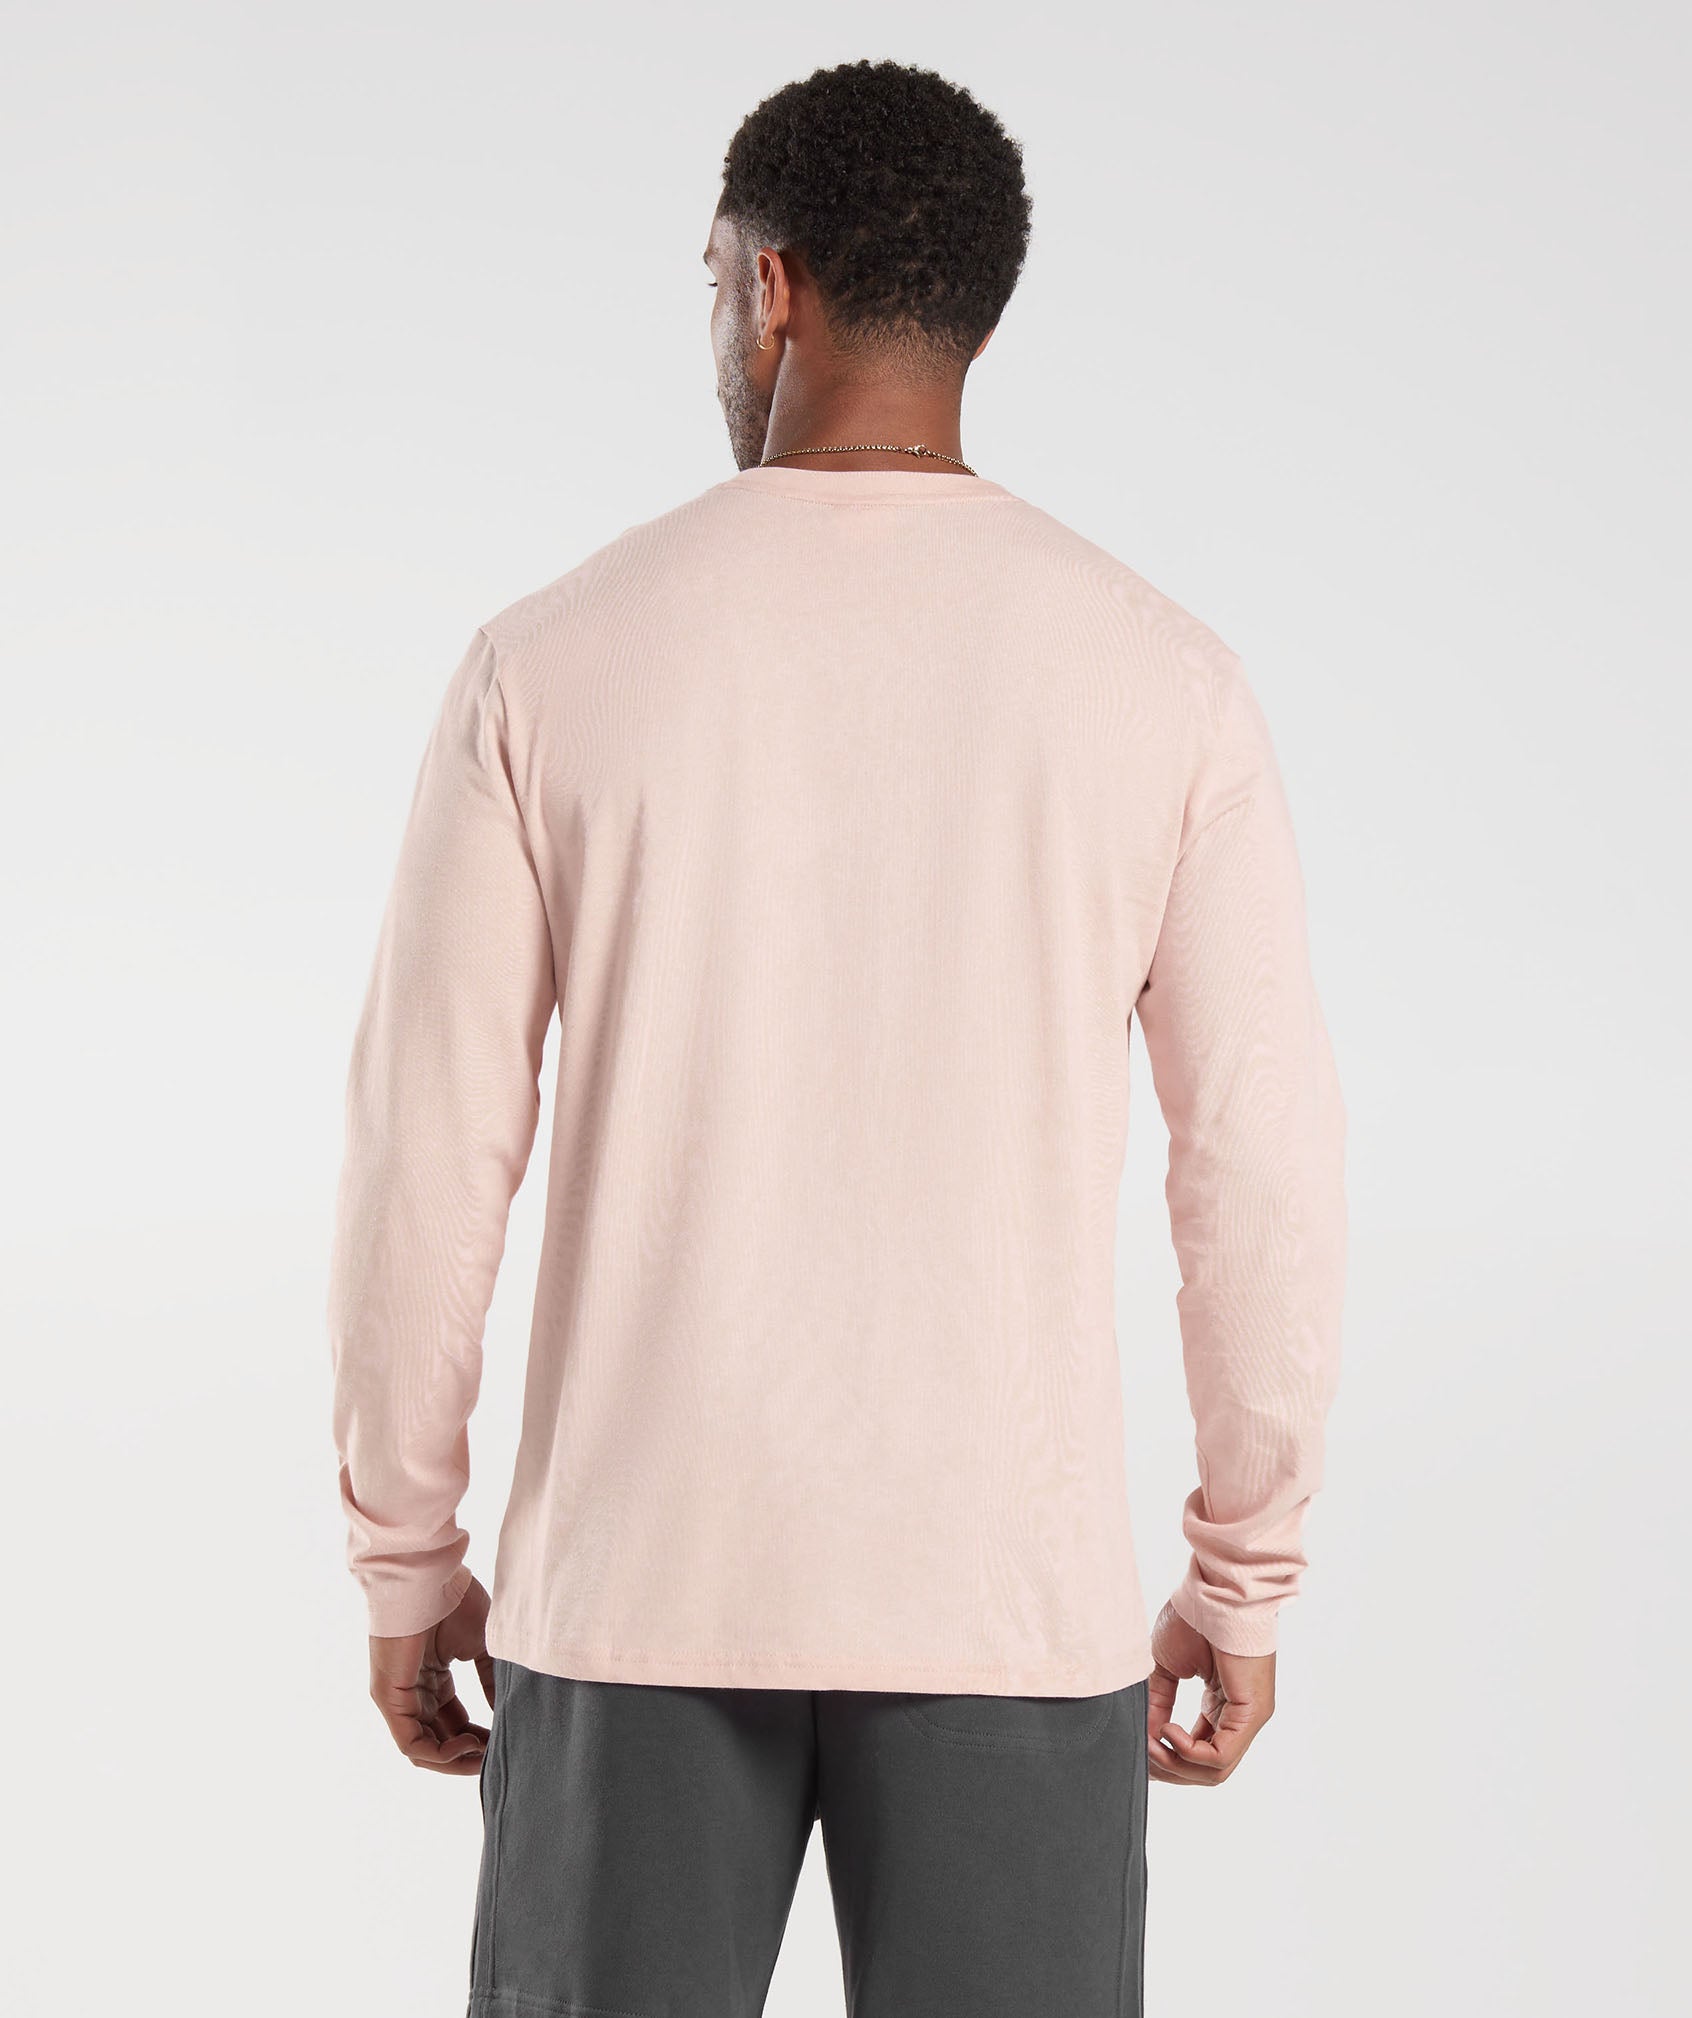 Crest Long Sleeve T-Shirt in Misty Pink - view 2